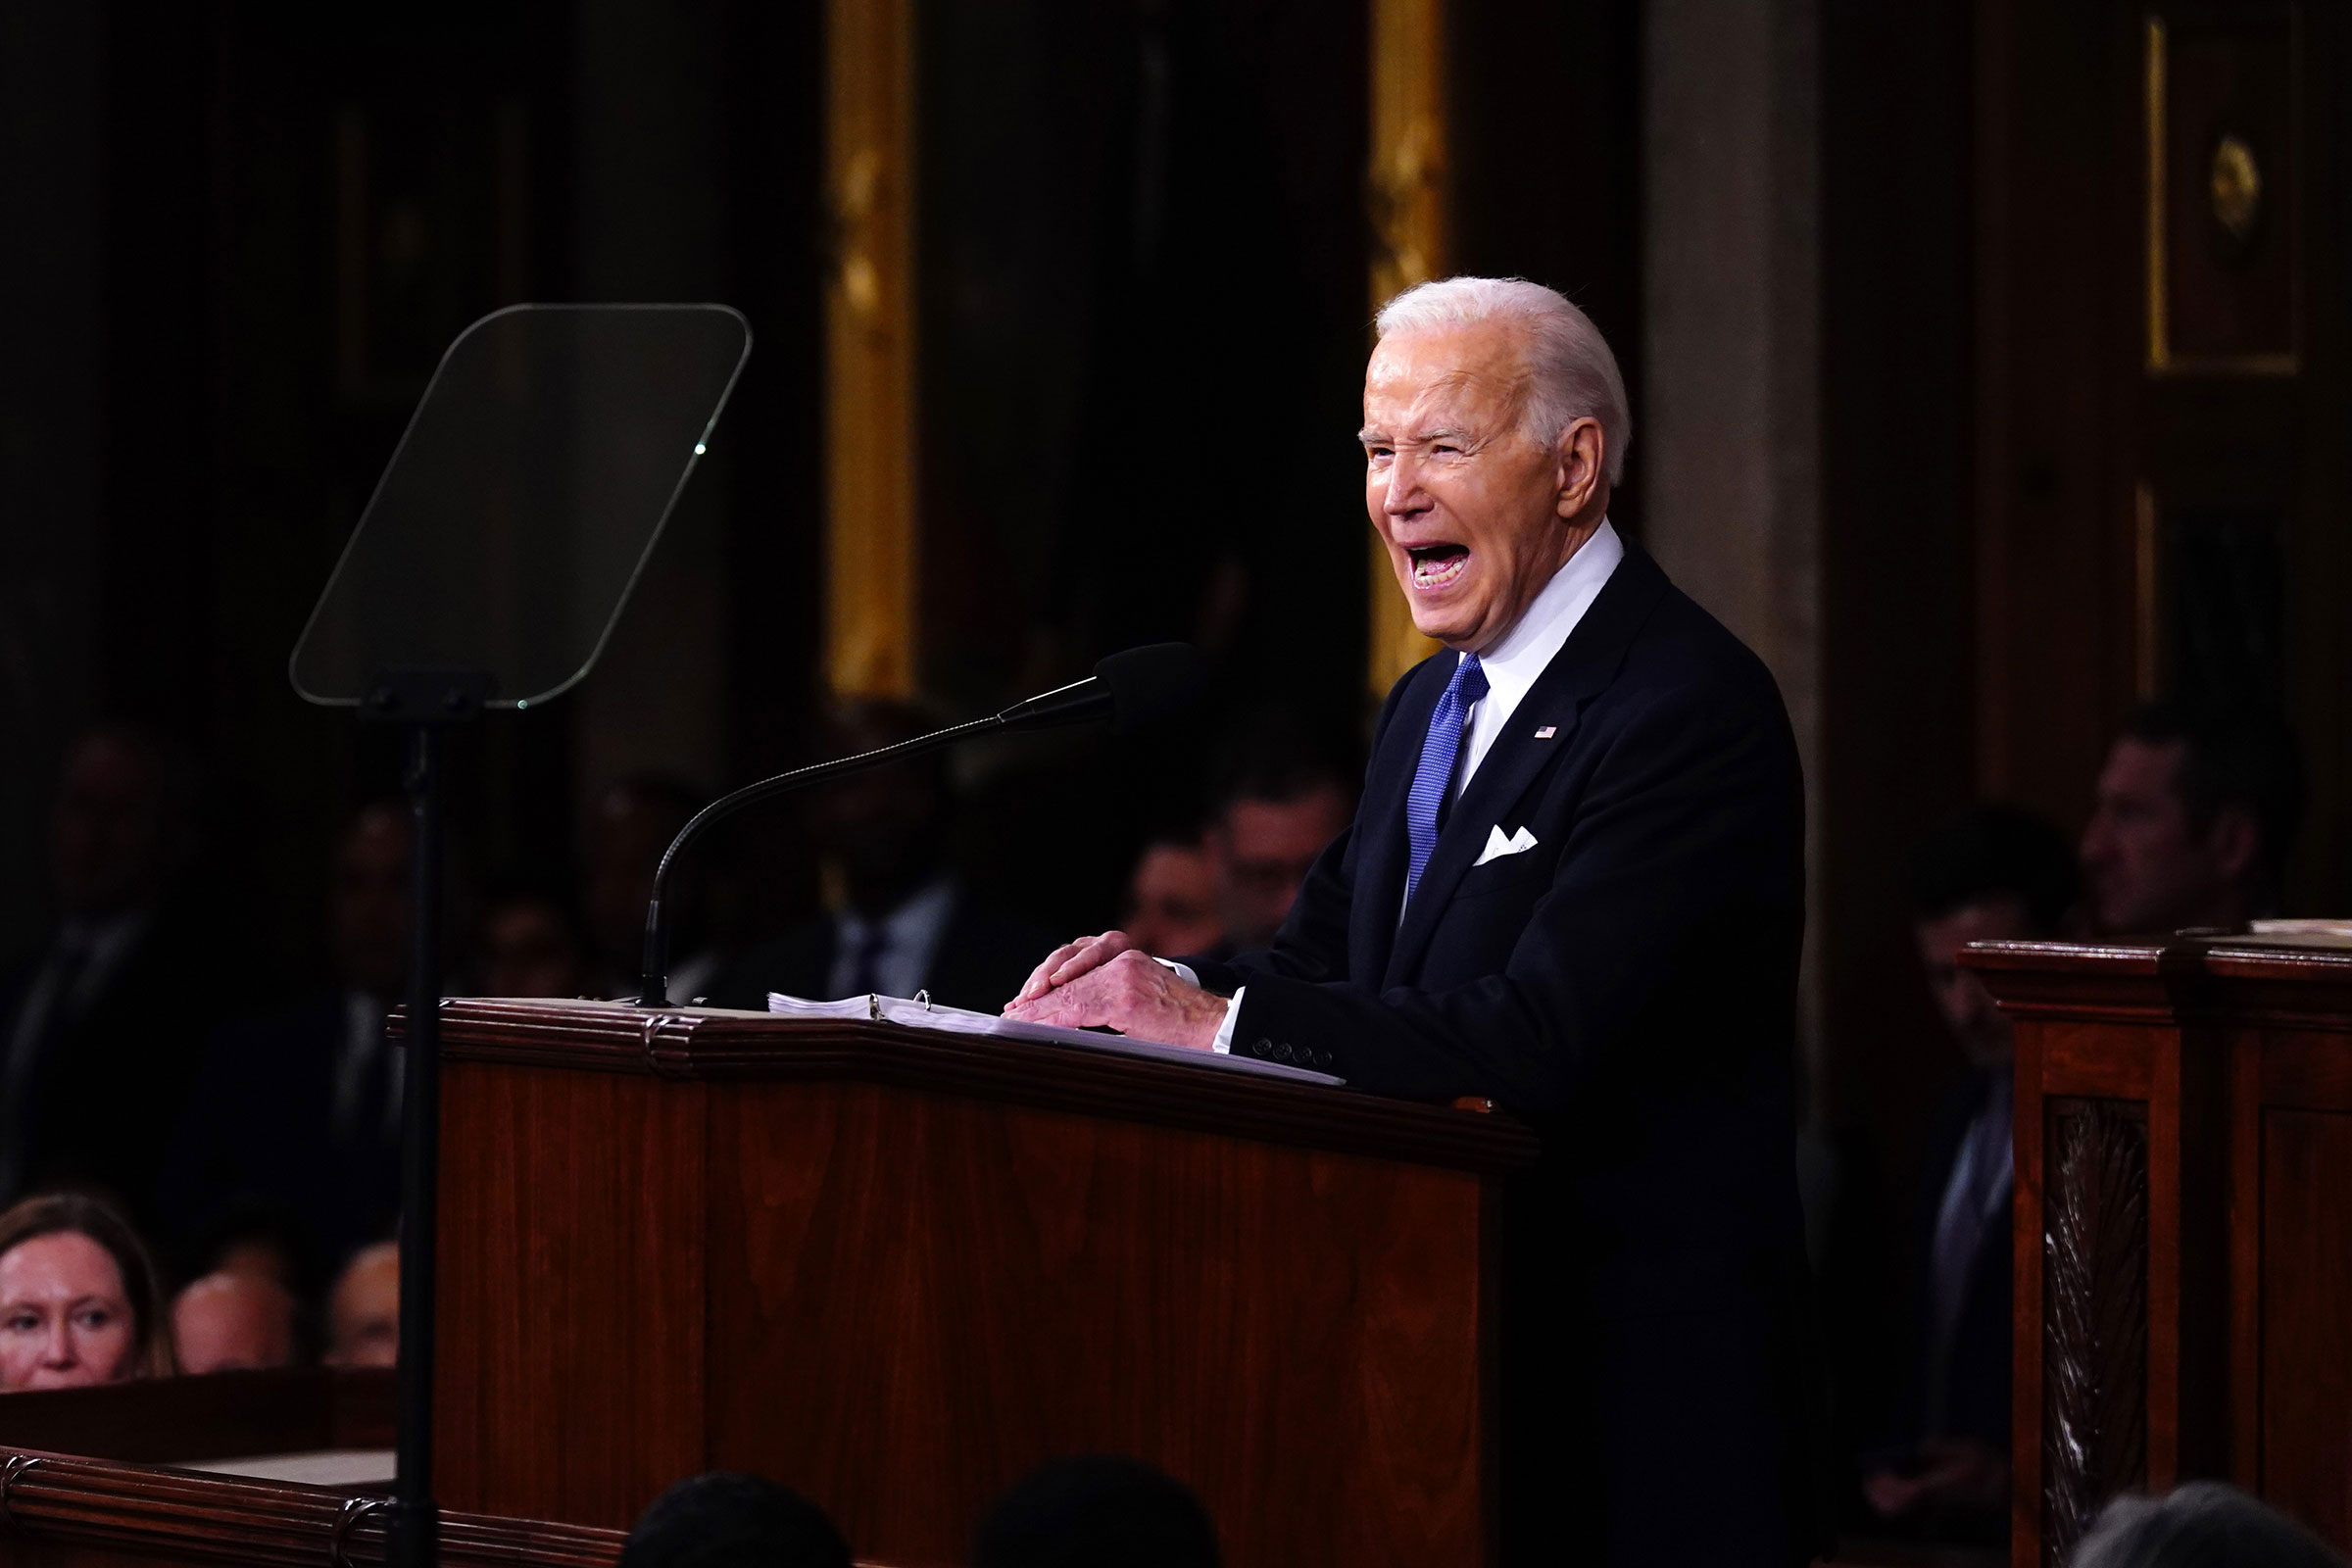 President Joe Biden delivers the annual State of the Union address before a joint session of Congress in the House chamber at the Capital building on March 7 in Washington, DC.